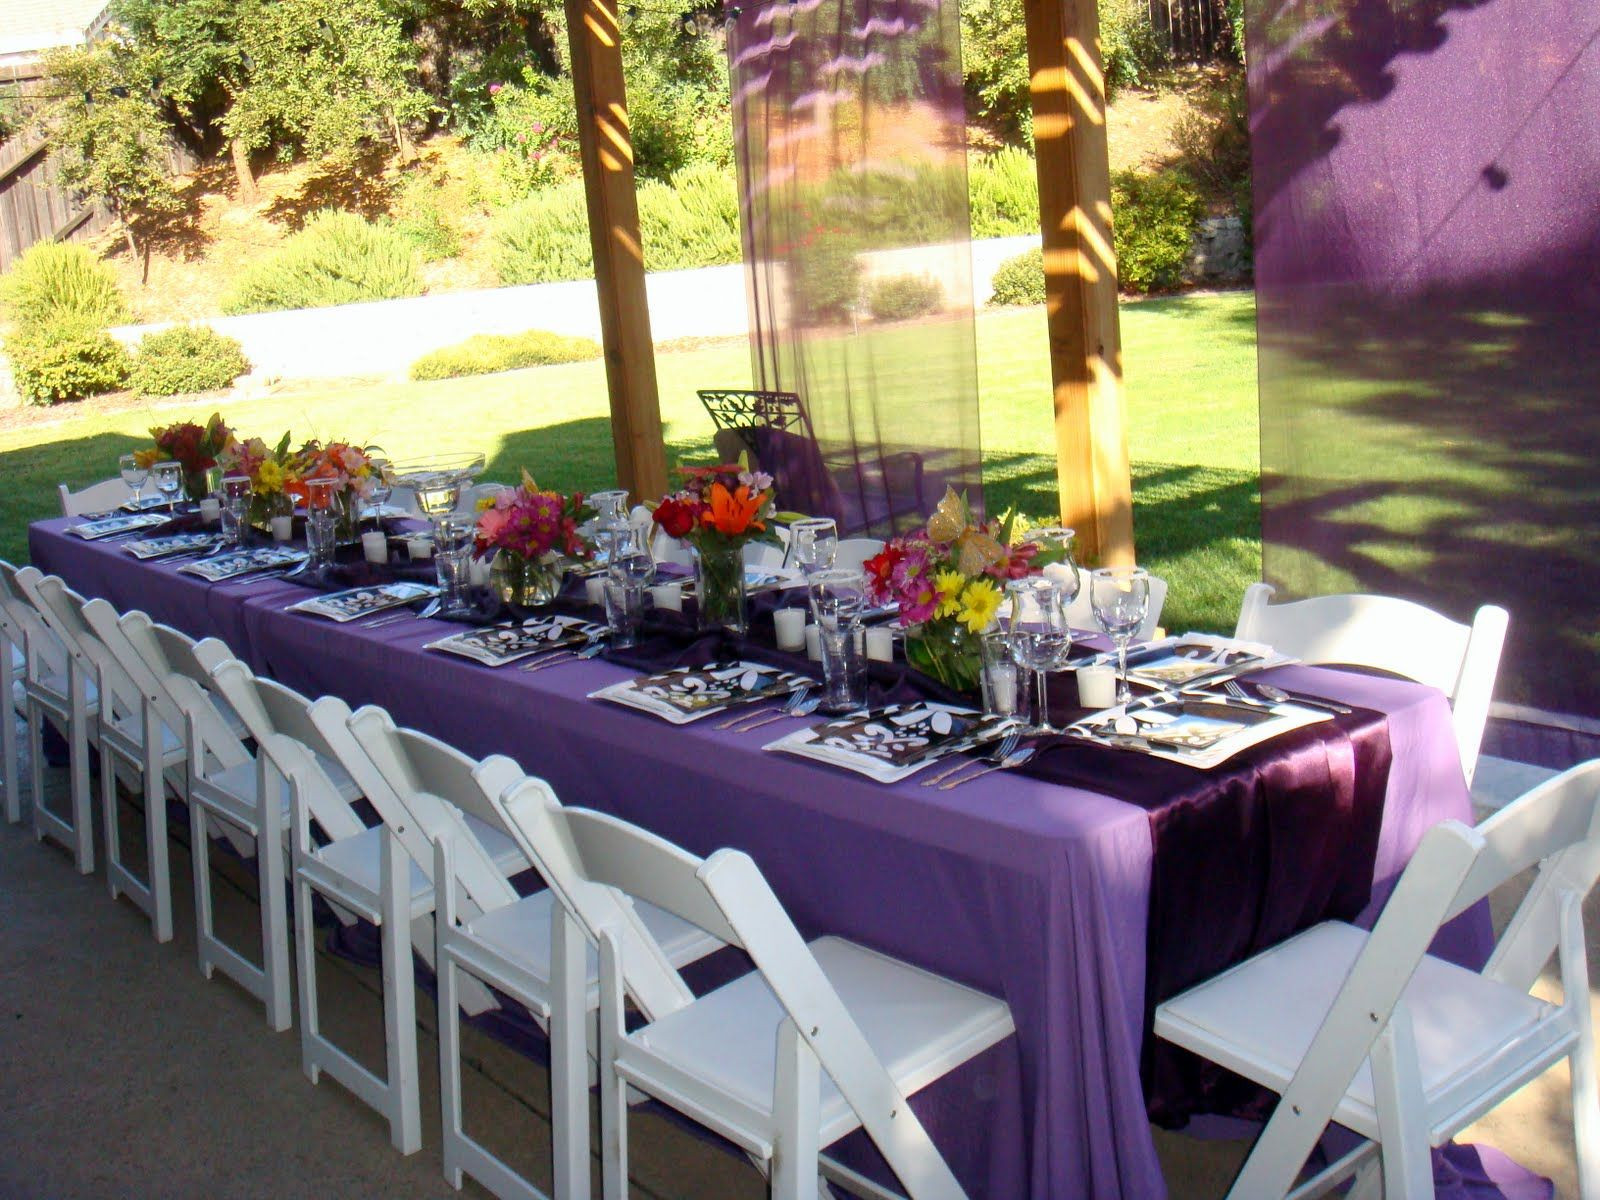 Bachelor Graduation Backyard Party Decorating Ideas
 tablescapes for outdoor graduation party